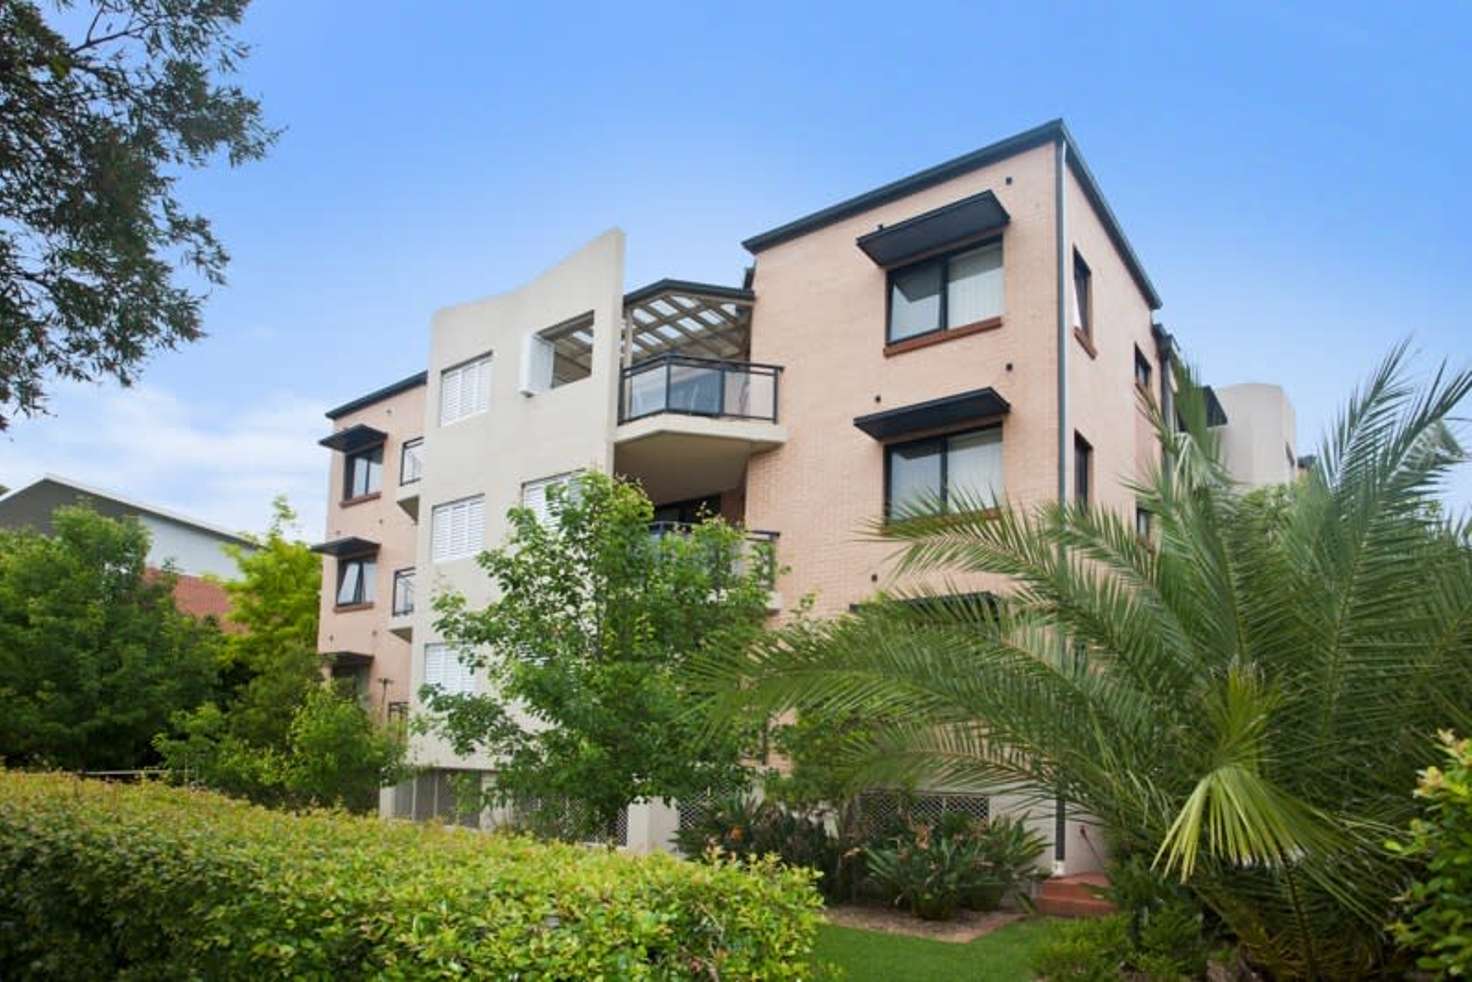 Main view of Homely apartment listing, 13/280-286 Kingsway, Caringbah NSW 2229